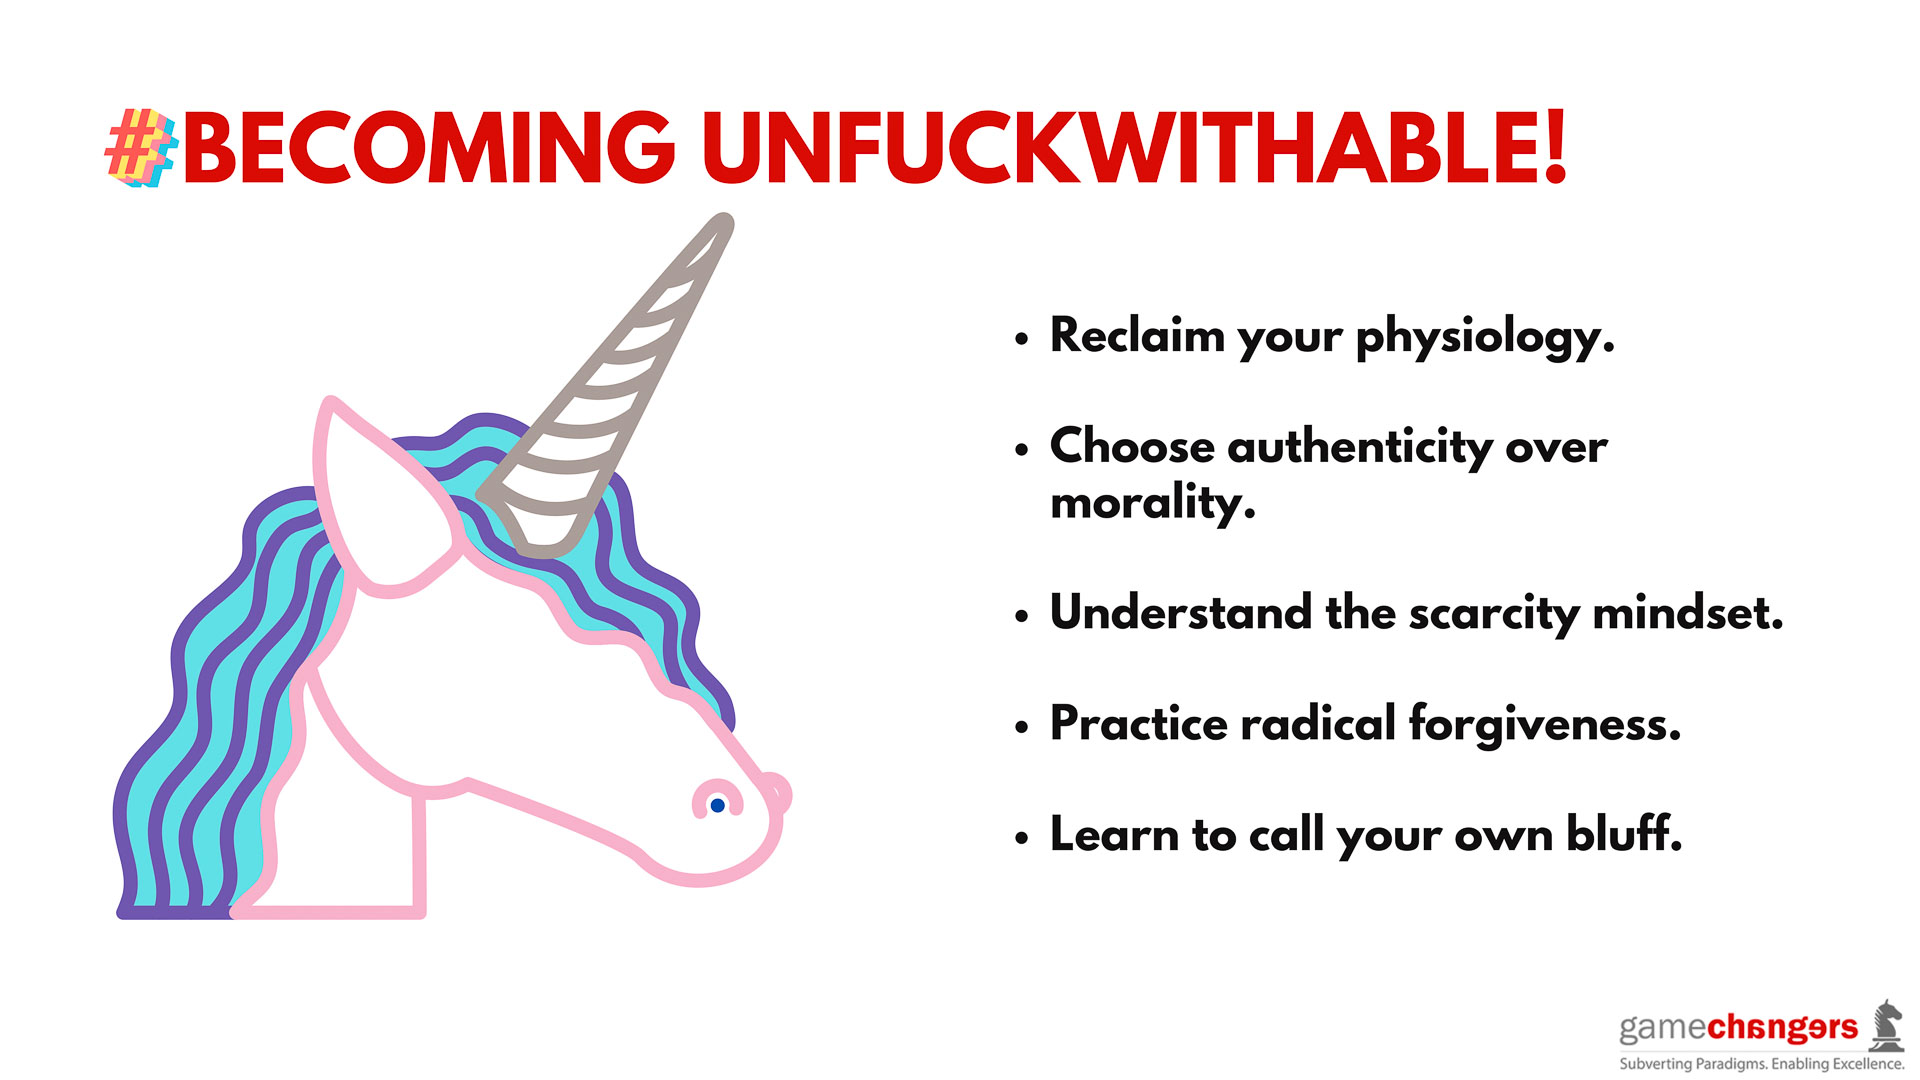 “eil-becoming-unfuckwithable-10”